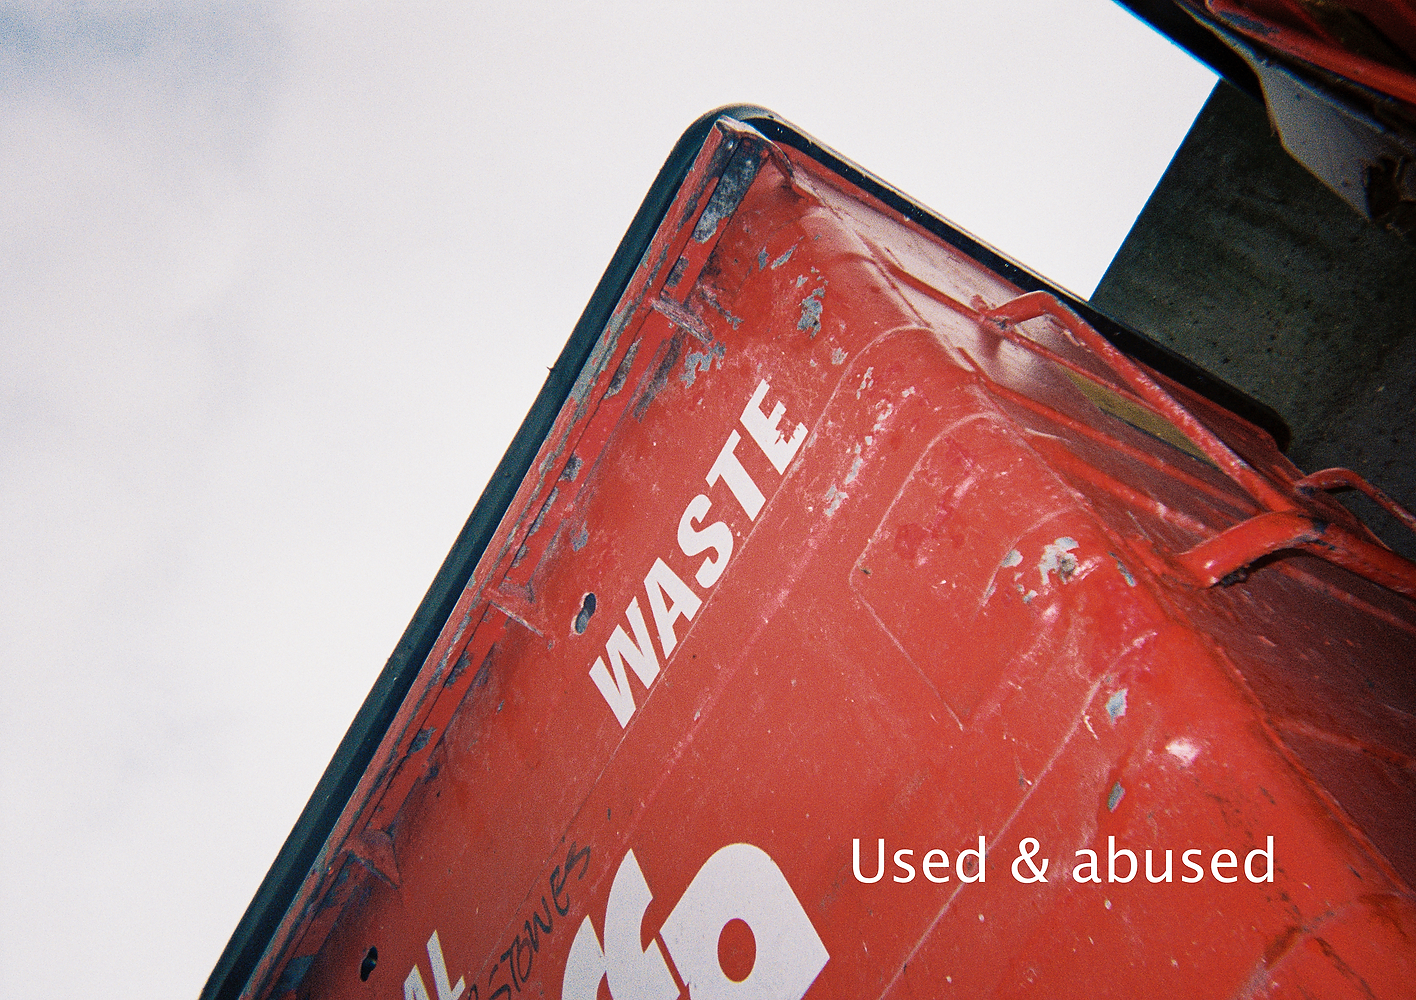 An image of a red industrial rubbish bin taken from a low-angle against a cloudy sky. The bin reads "Waste" and the picture is captioned "Used & abused"